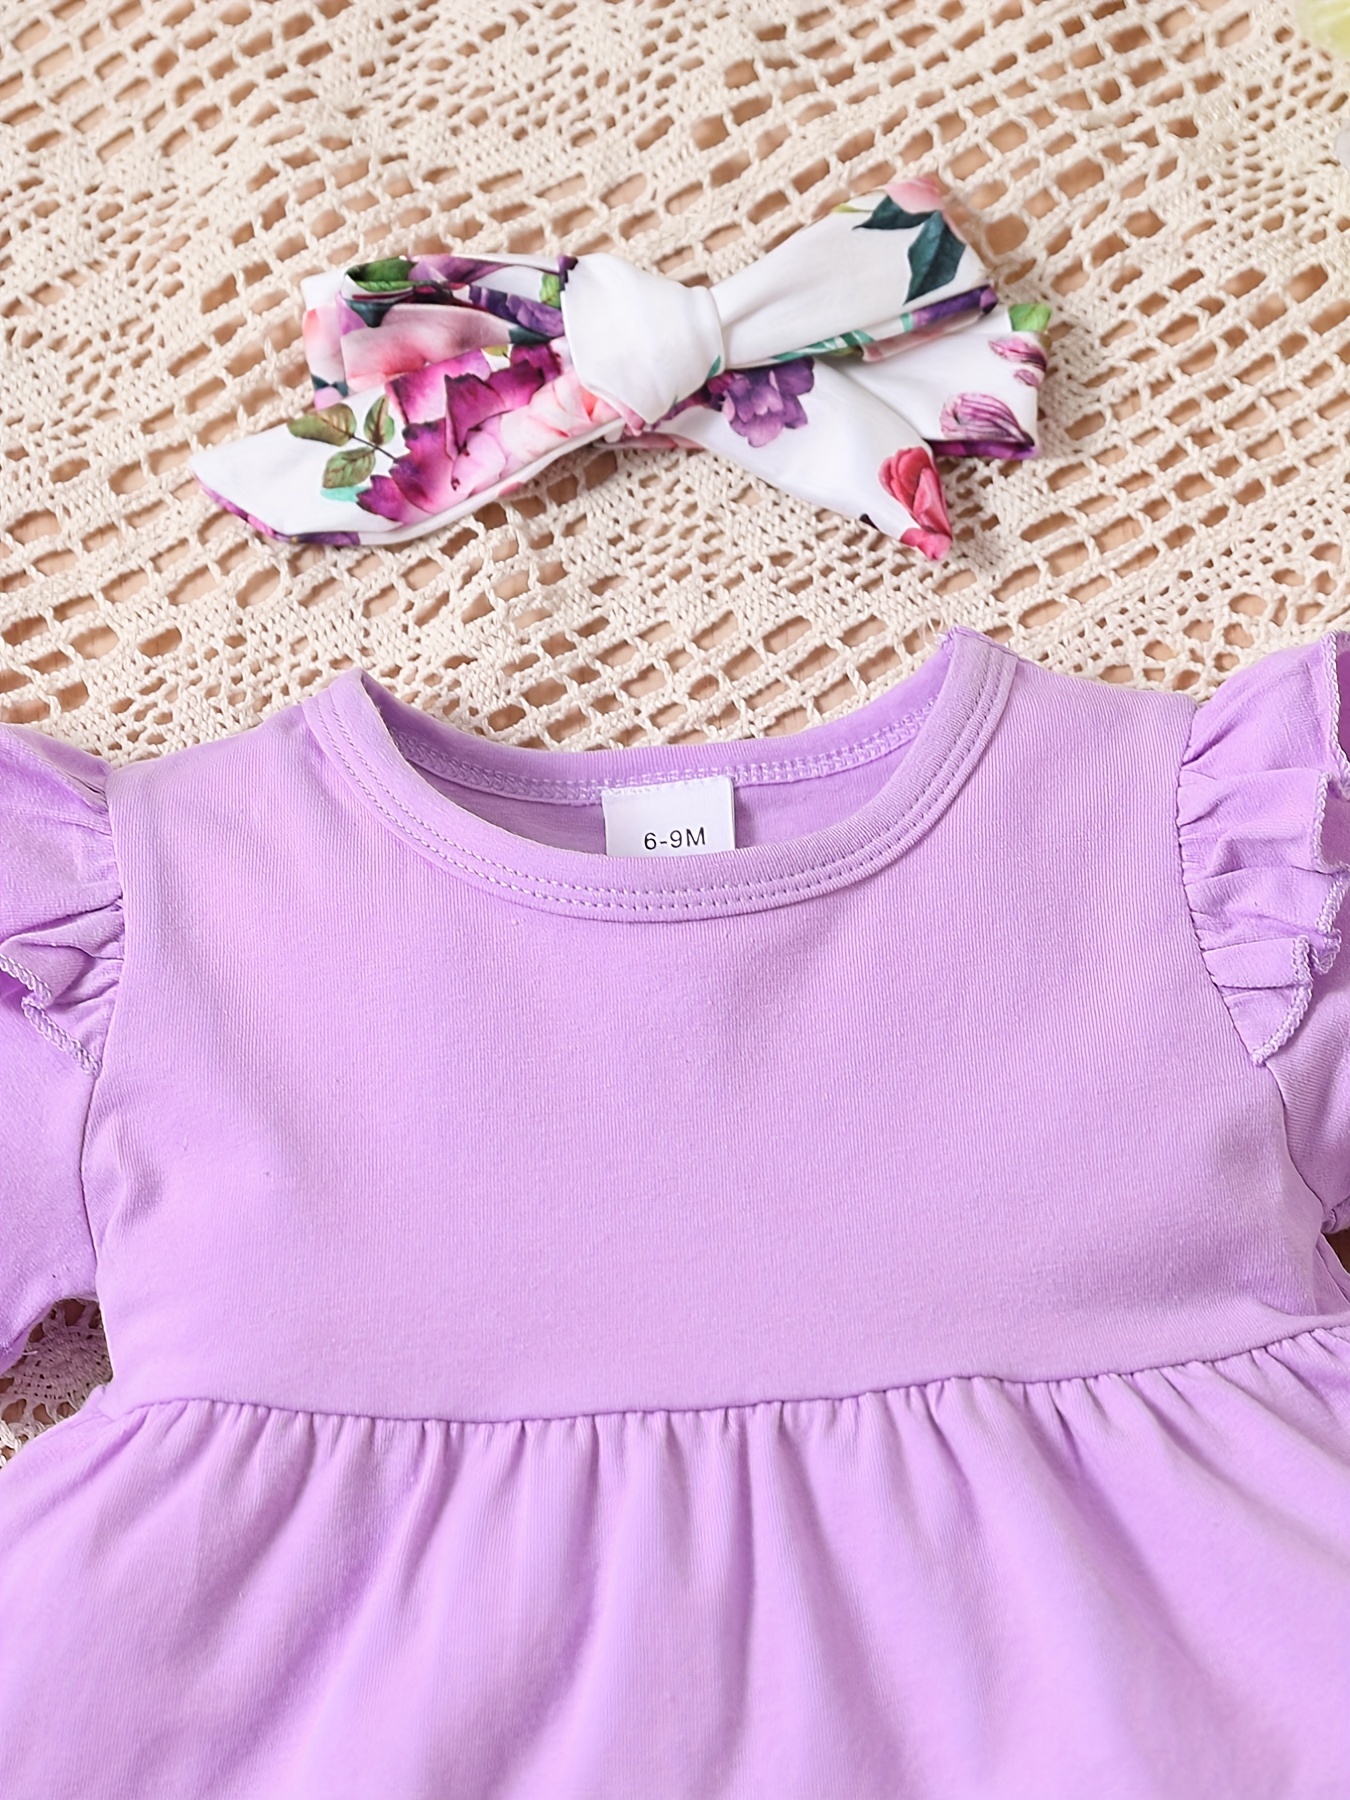 Cute Toddler Clothes & Outfits